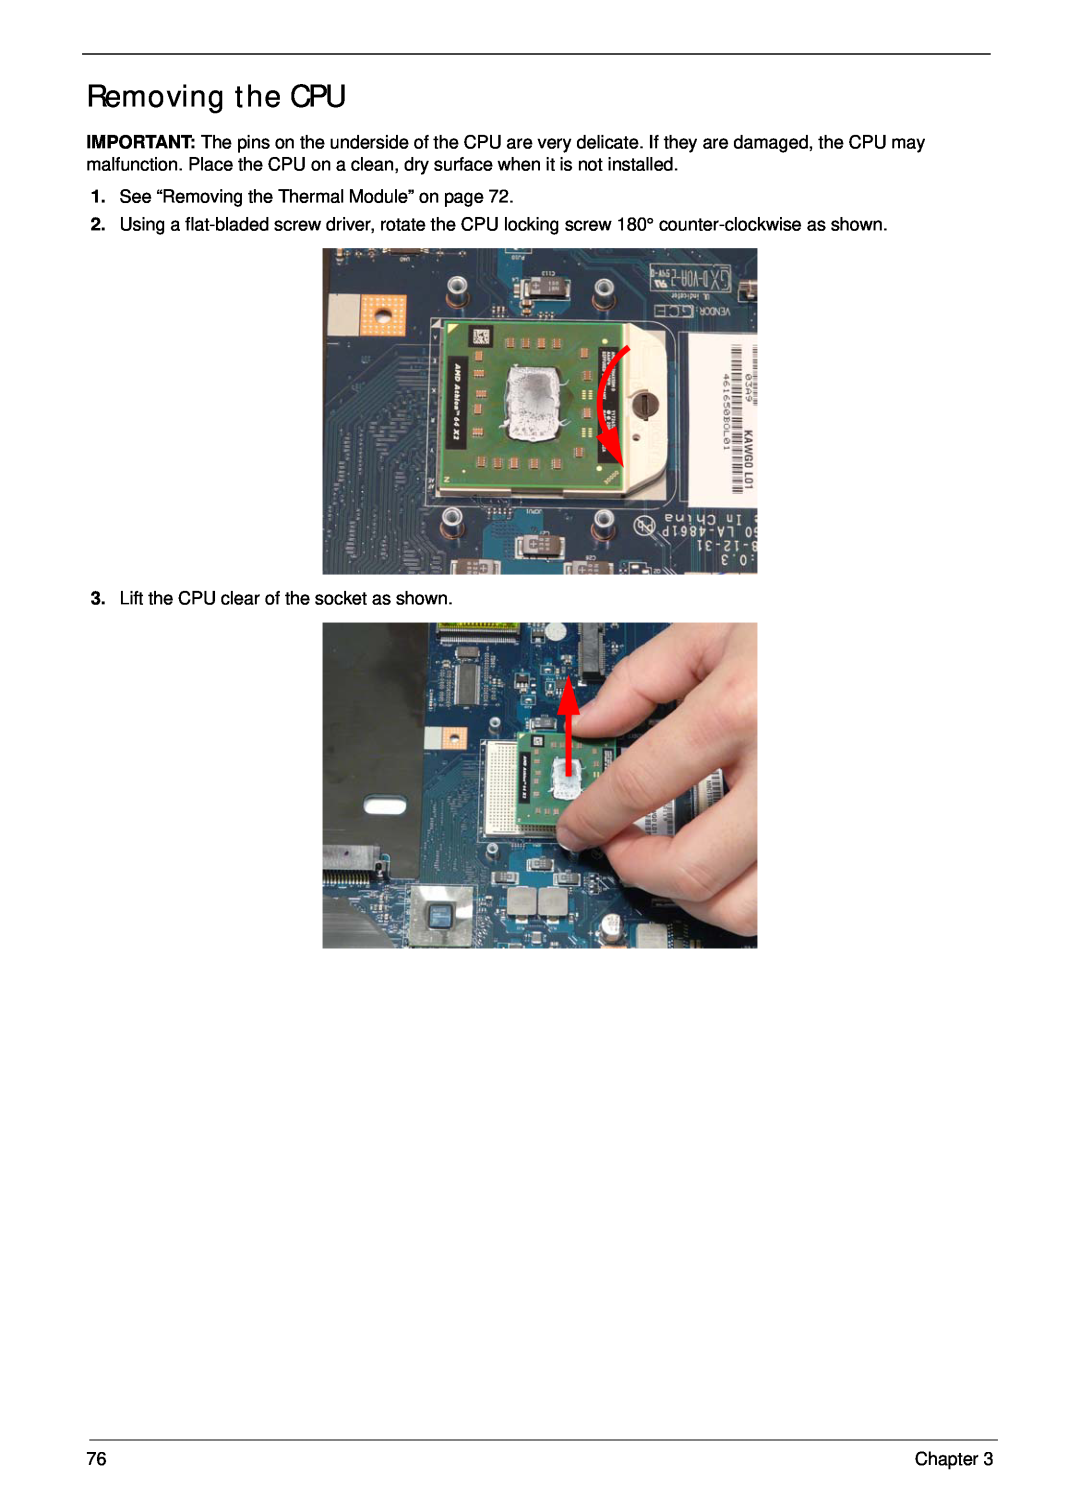 Acer 5532 Removing the CPU, See “Removing the Thermal Module” on page, Lift the CPU clear of the socket as shown, Chapter 